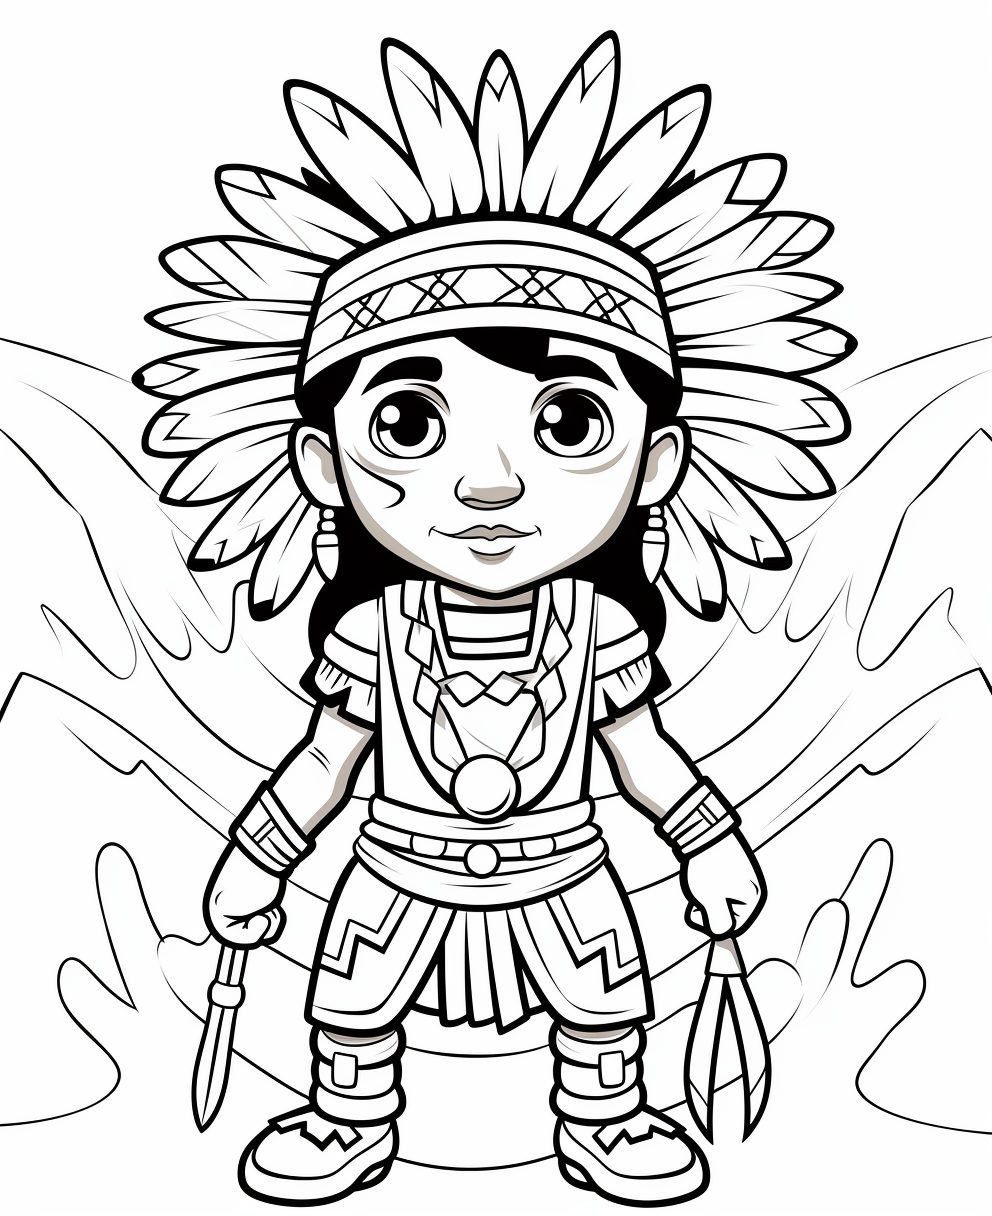 Indians coloring page coloring books for children coloring pages